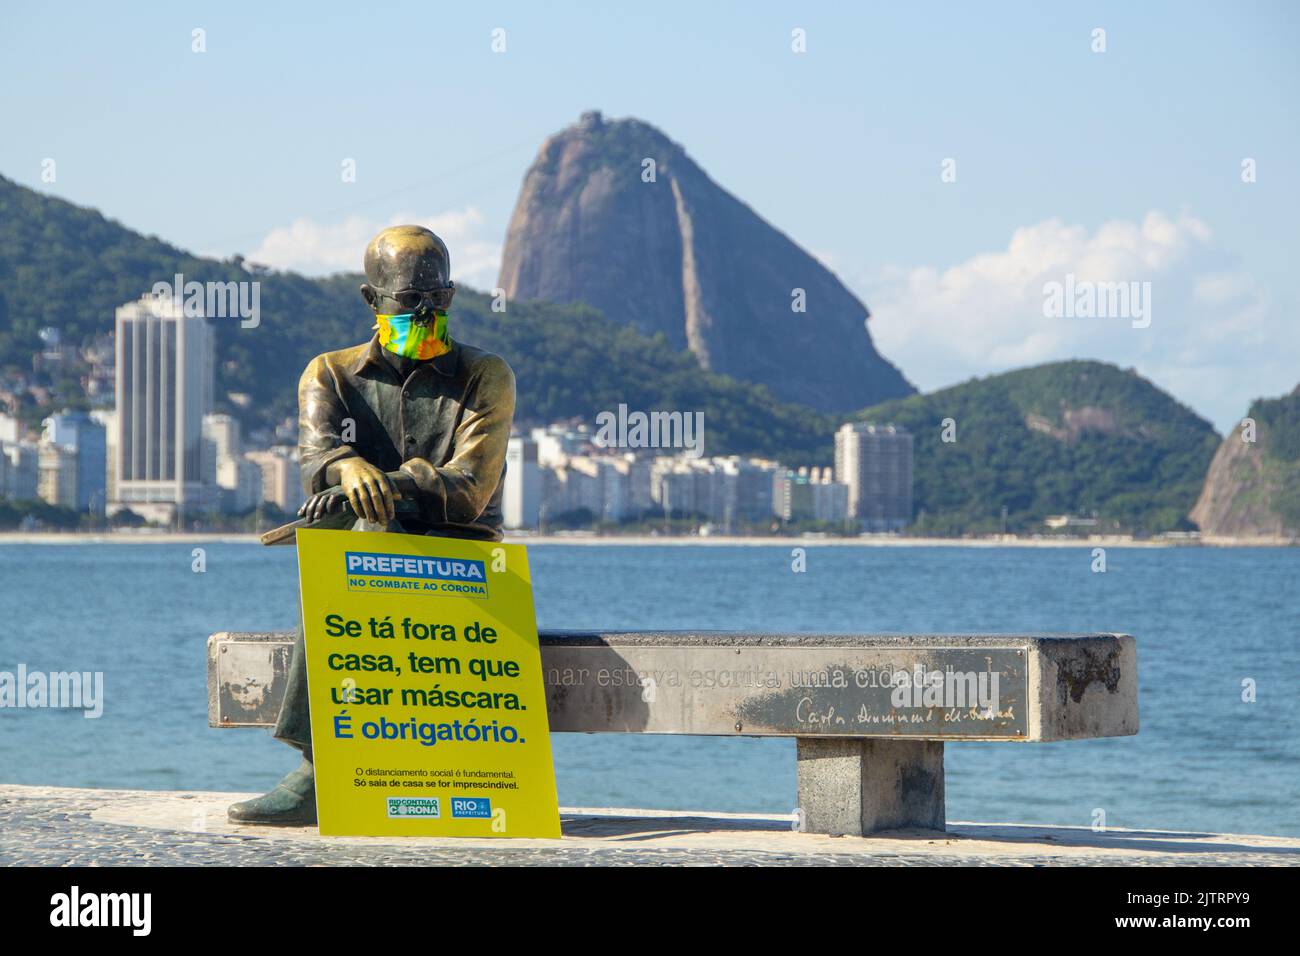 Statue of Carlos Drummond de Andrade with mask in Rio de Janeiro, Brazil - April 23, 2020: Statue with mask and information board written in Portugues Stock Photo